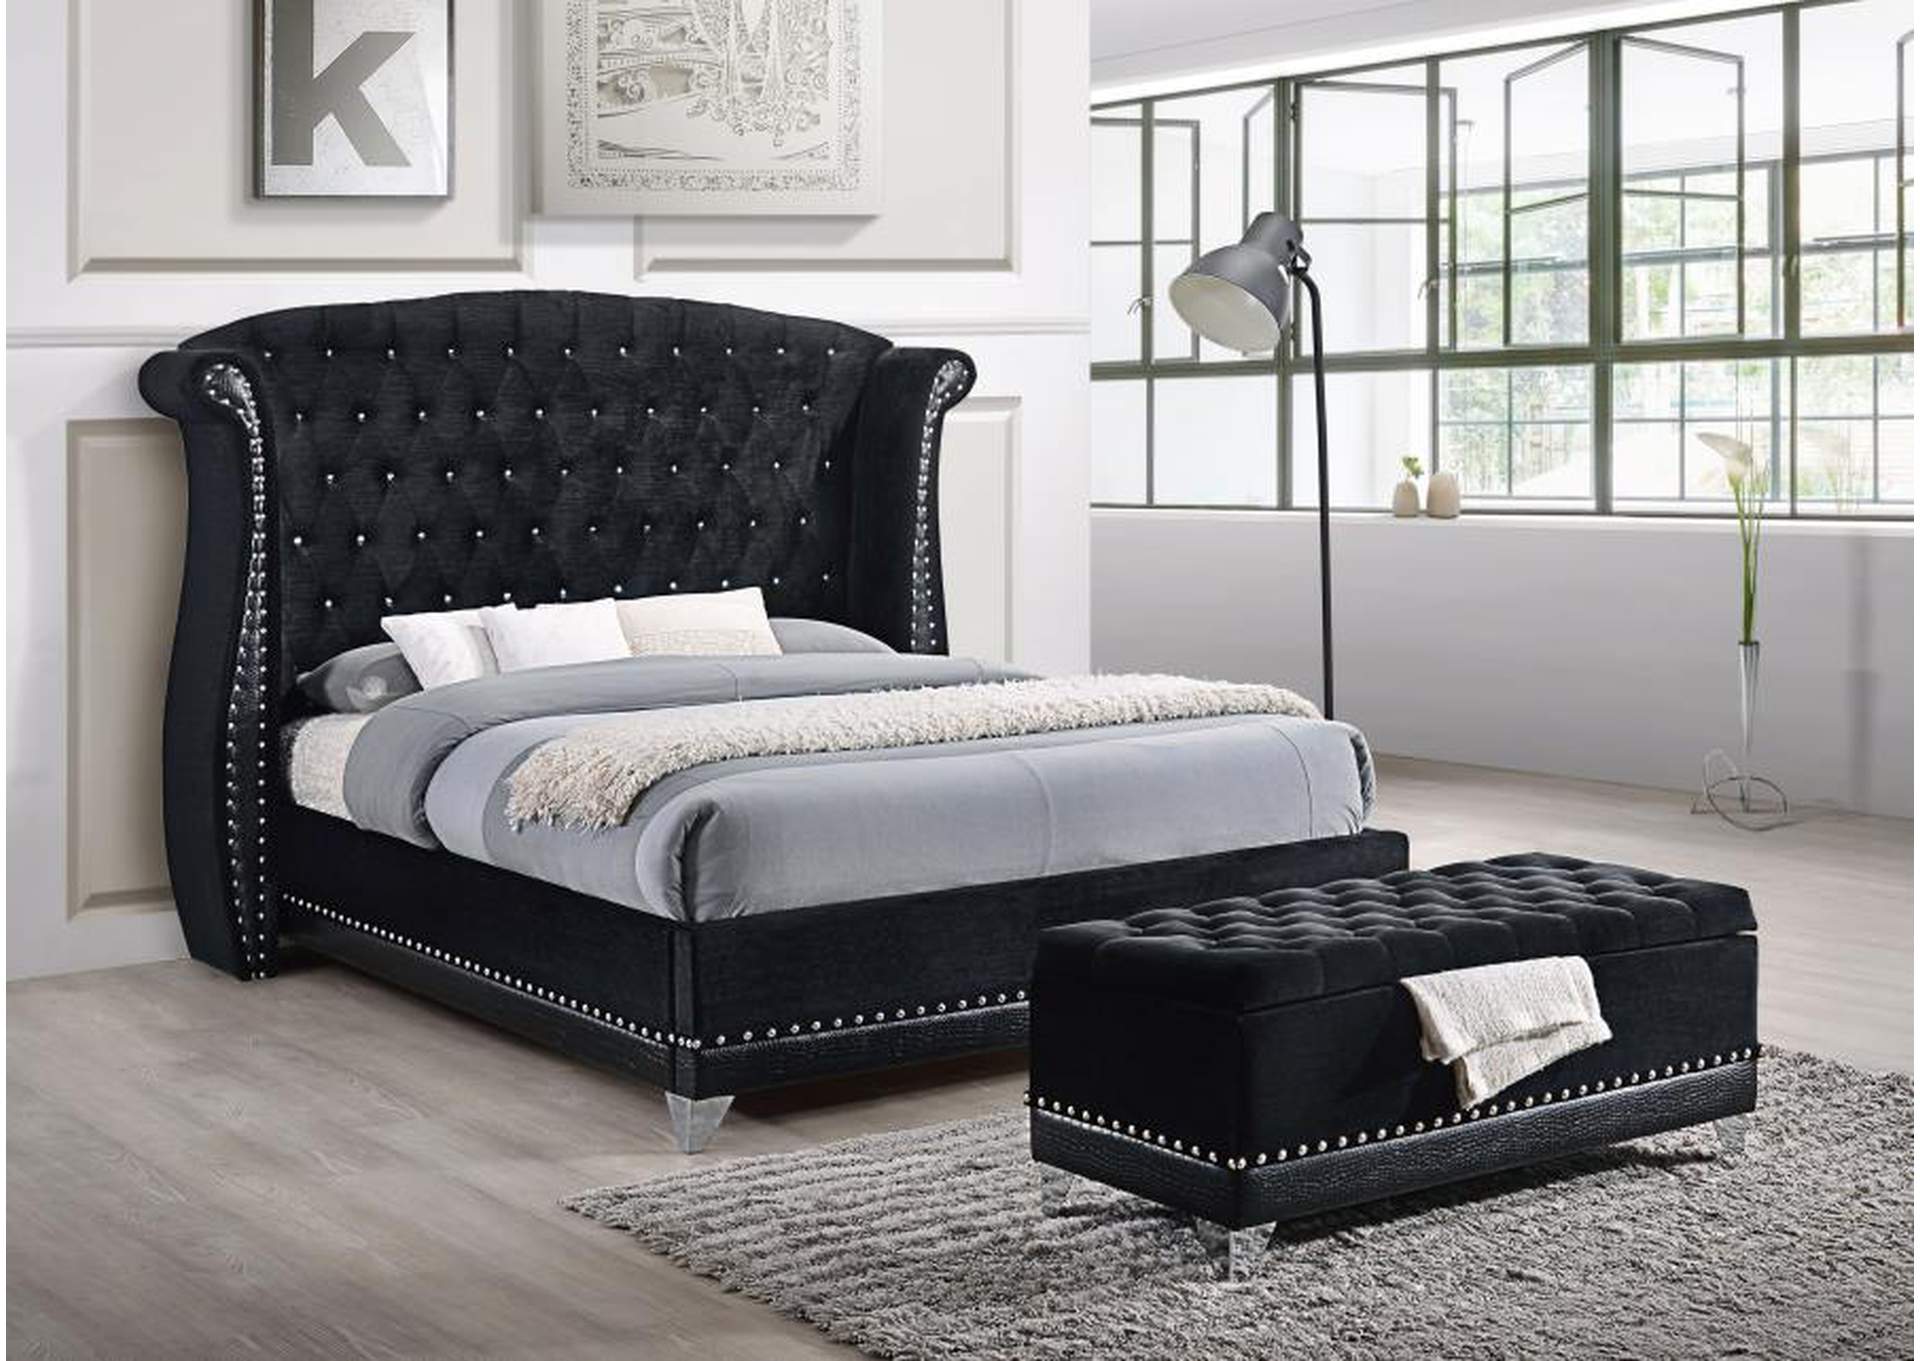 Barzini Queen Tufted Upholstered Bed Black,Coaster Furniture